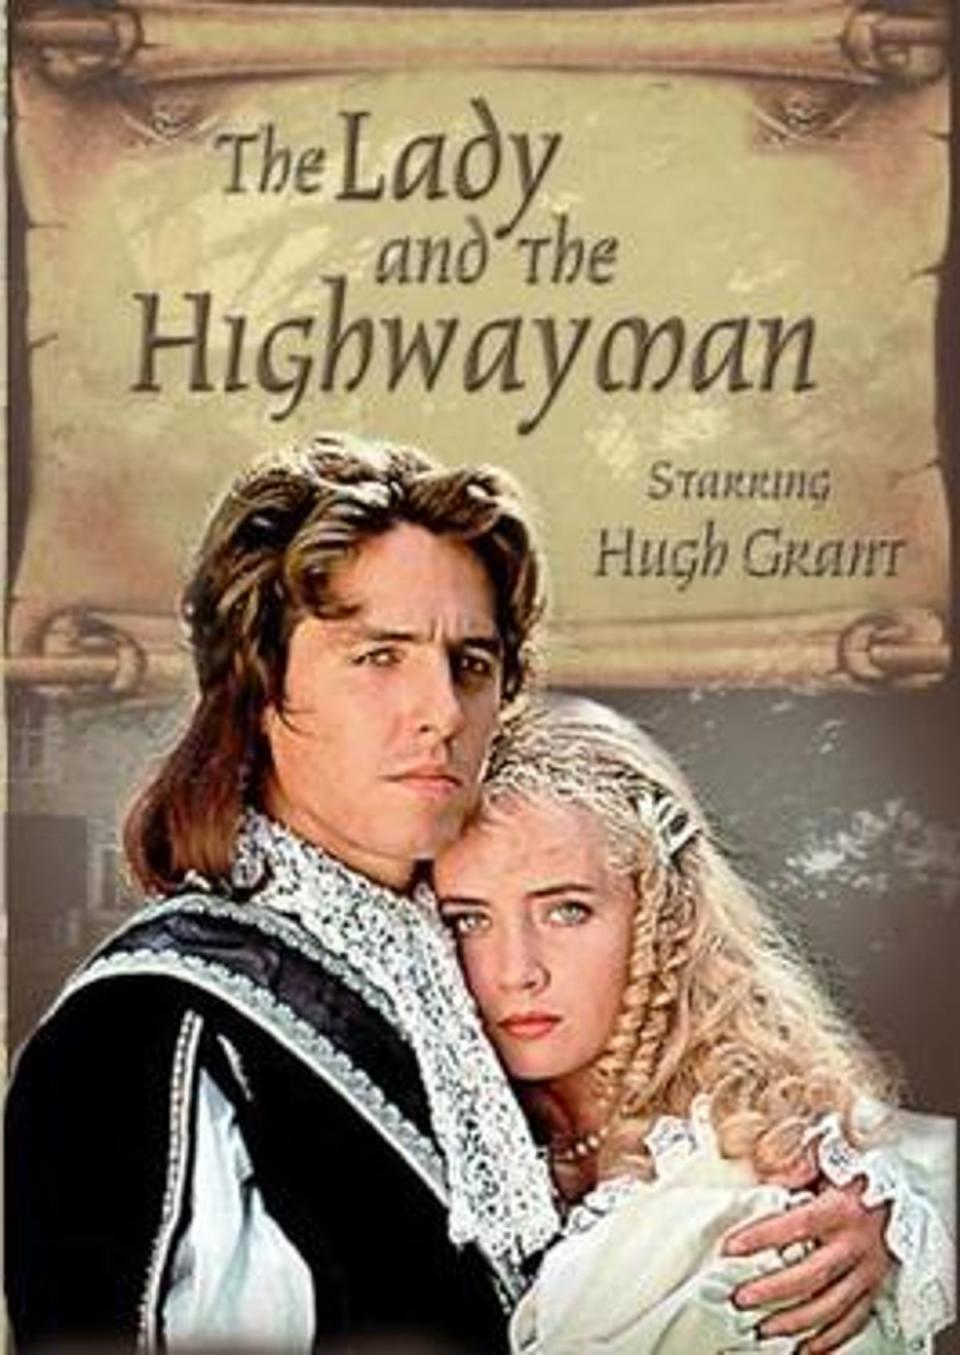 ‘The Lady and the Highwayman' poster (Gainsborough Pictures)